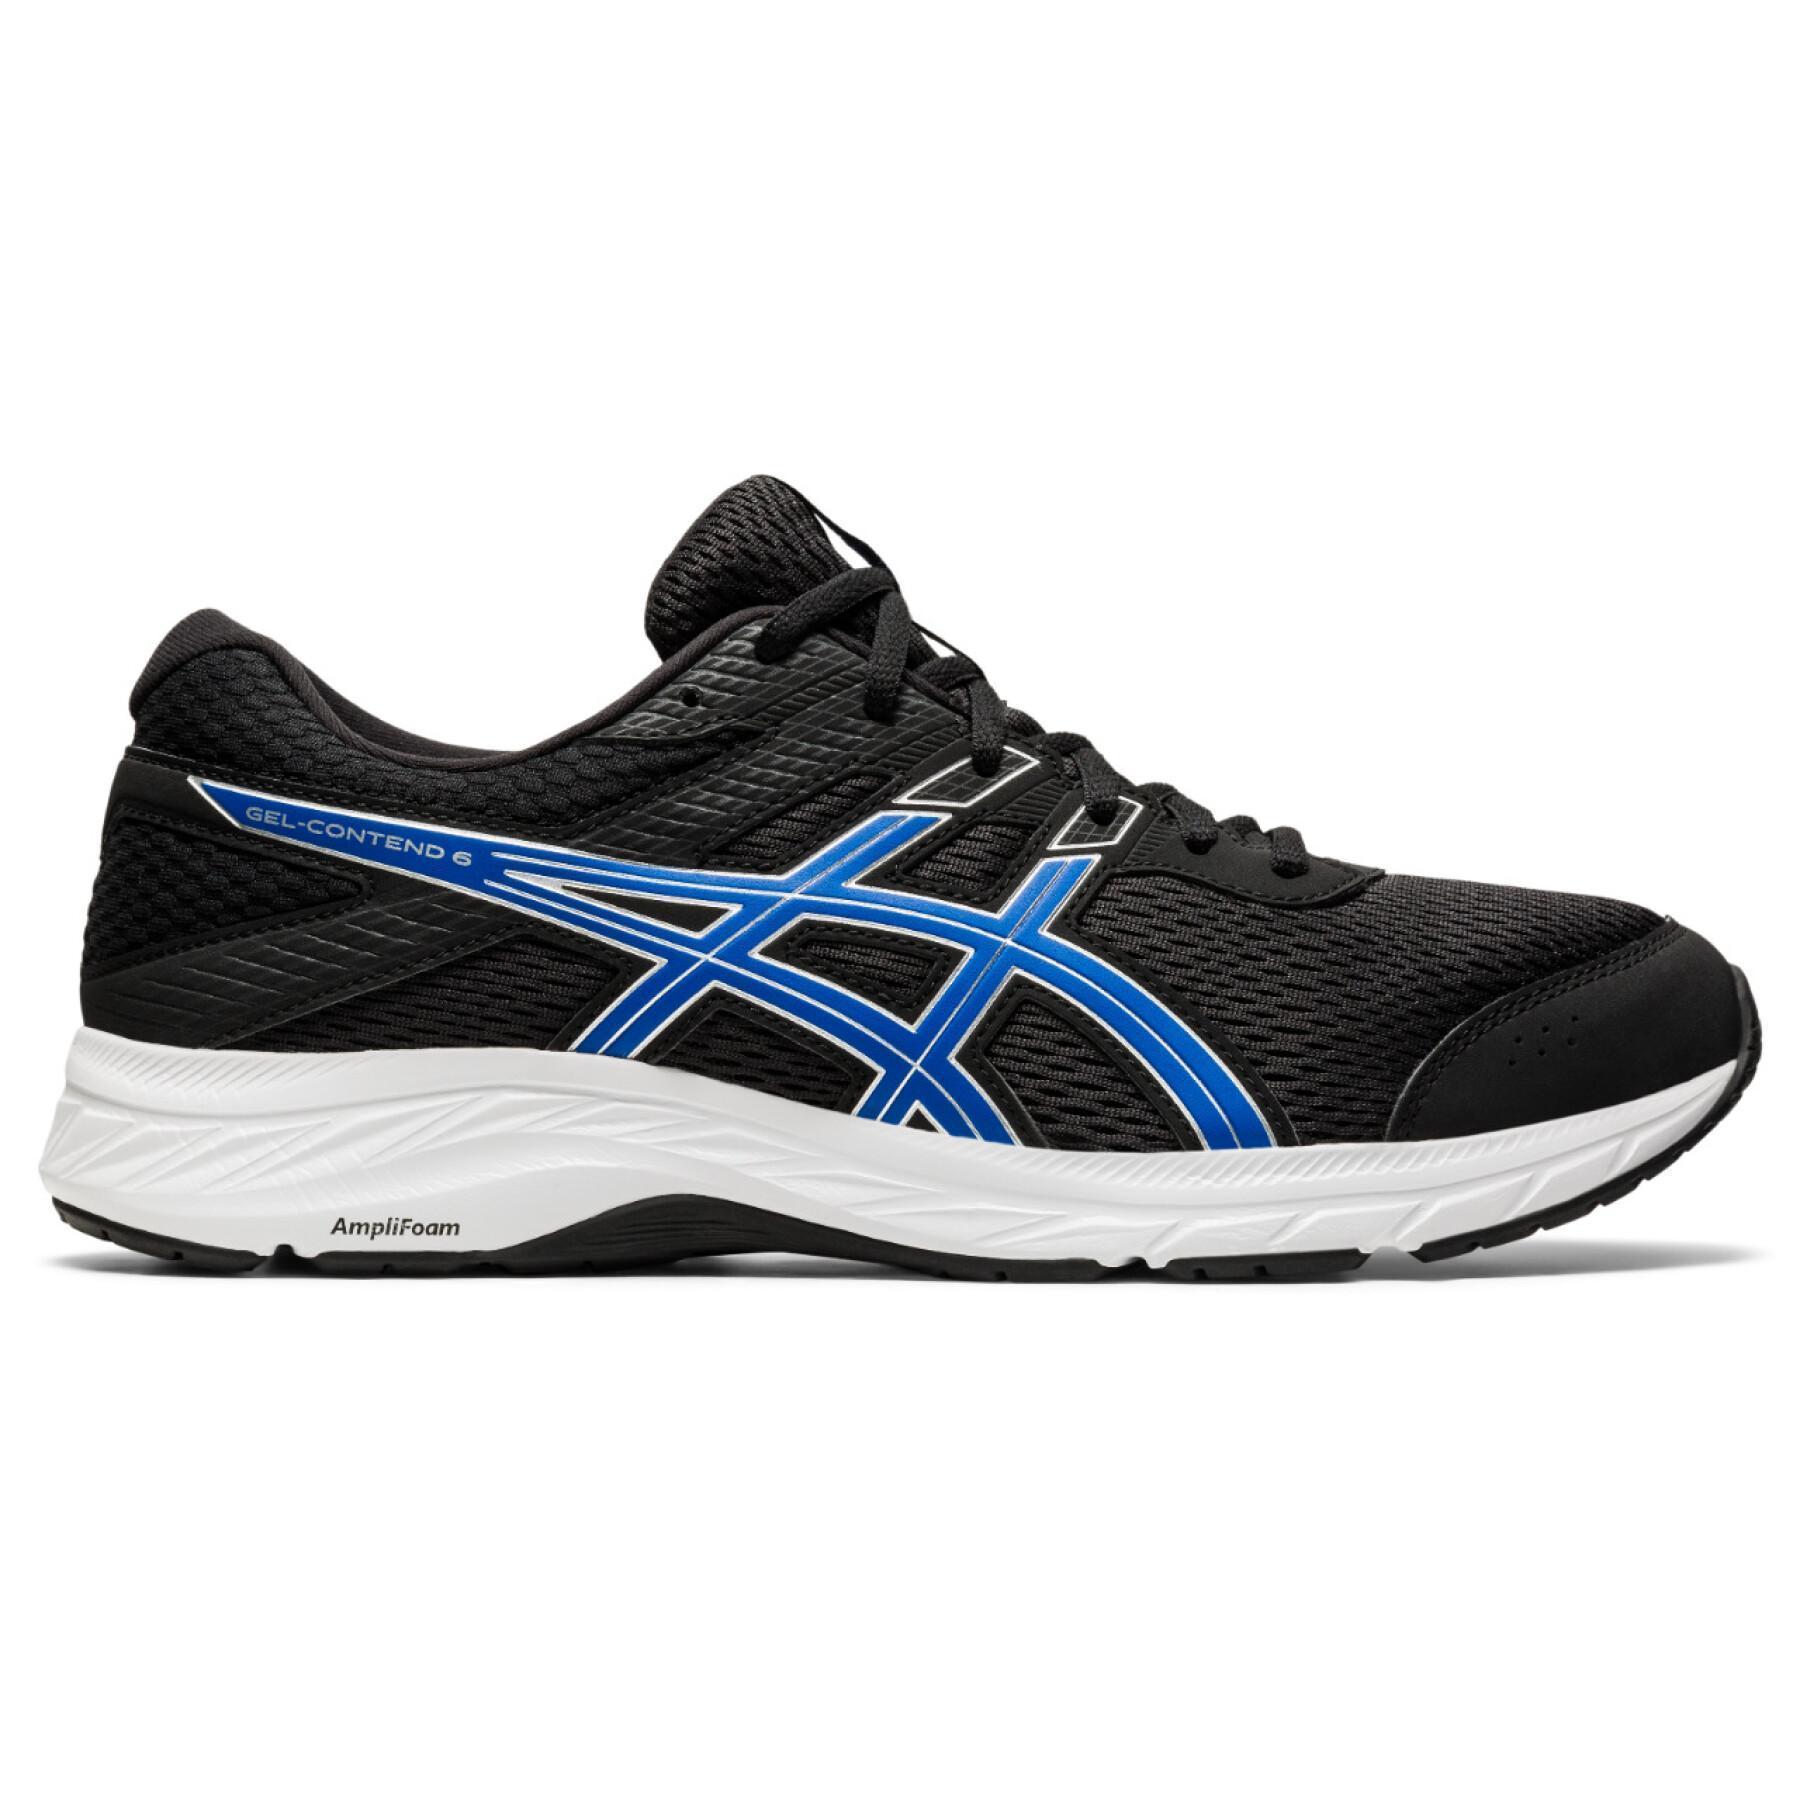 Shoes Asics Gel-Contend 6